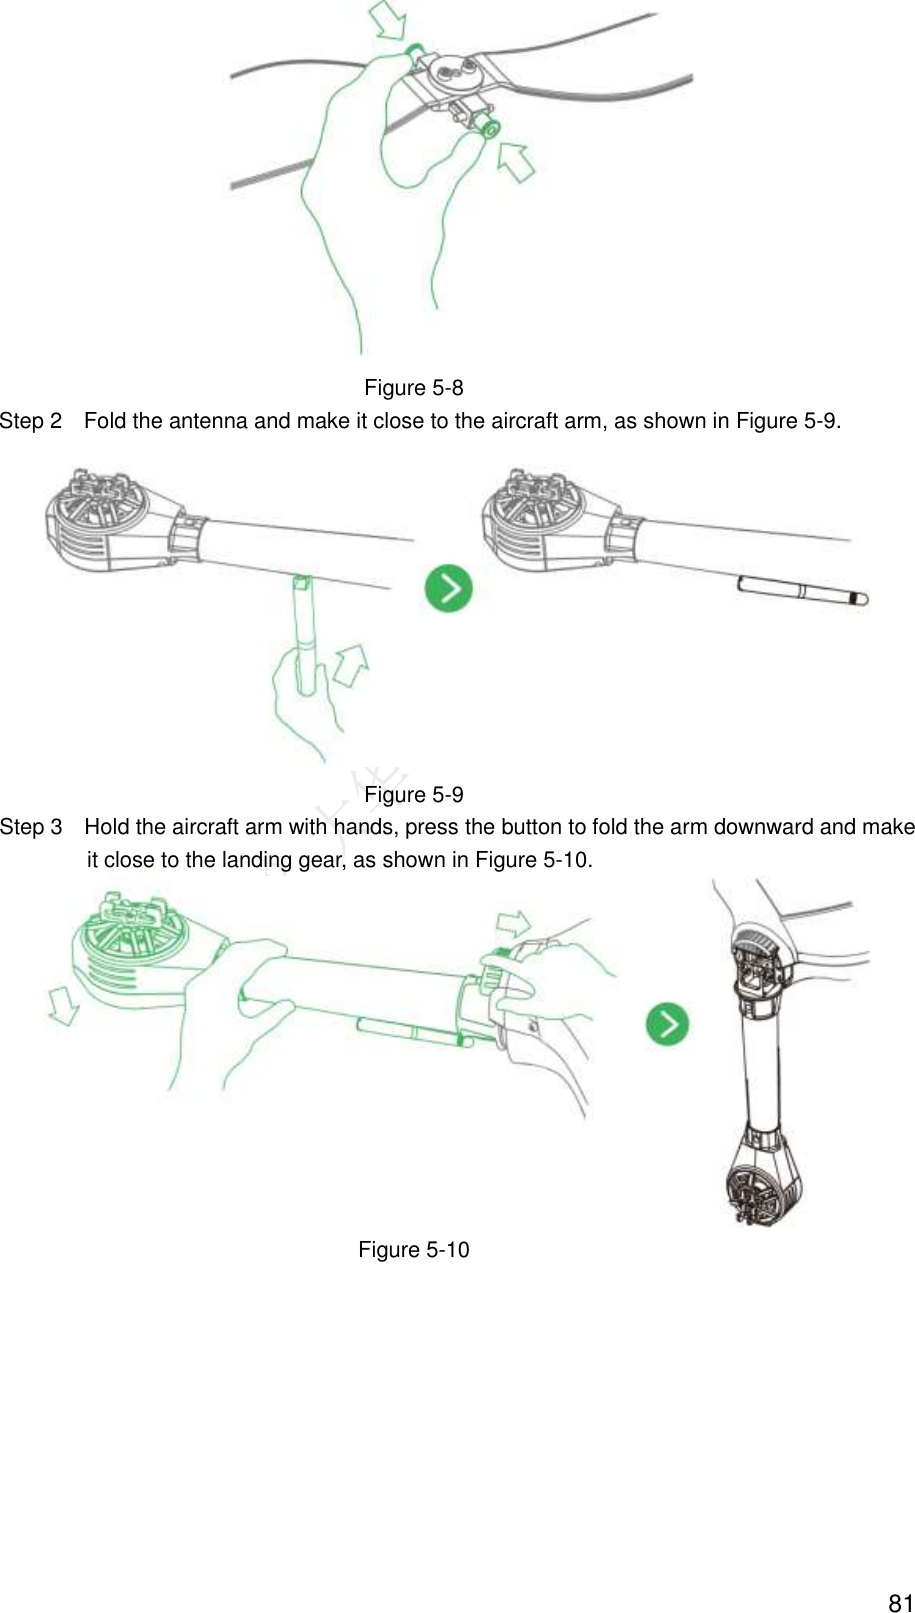  81  Figure 5-8 Step 2    Fold the antenna and make it close to the aircraft arm, as shown in Figure 5-9.  Figure 5-9                 Step 3    Hold the aircraft arm with hands, press the button to fold the arm downward and make it close to the landing gear, as shown in Figure 5-10.  Figure 5-10 